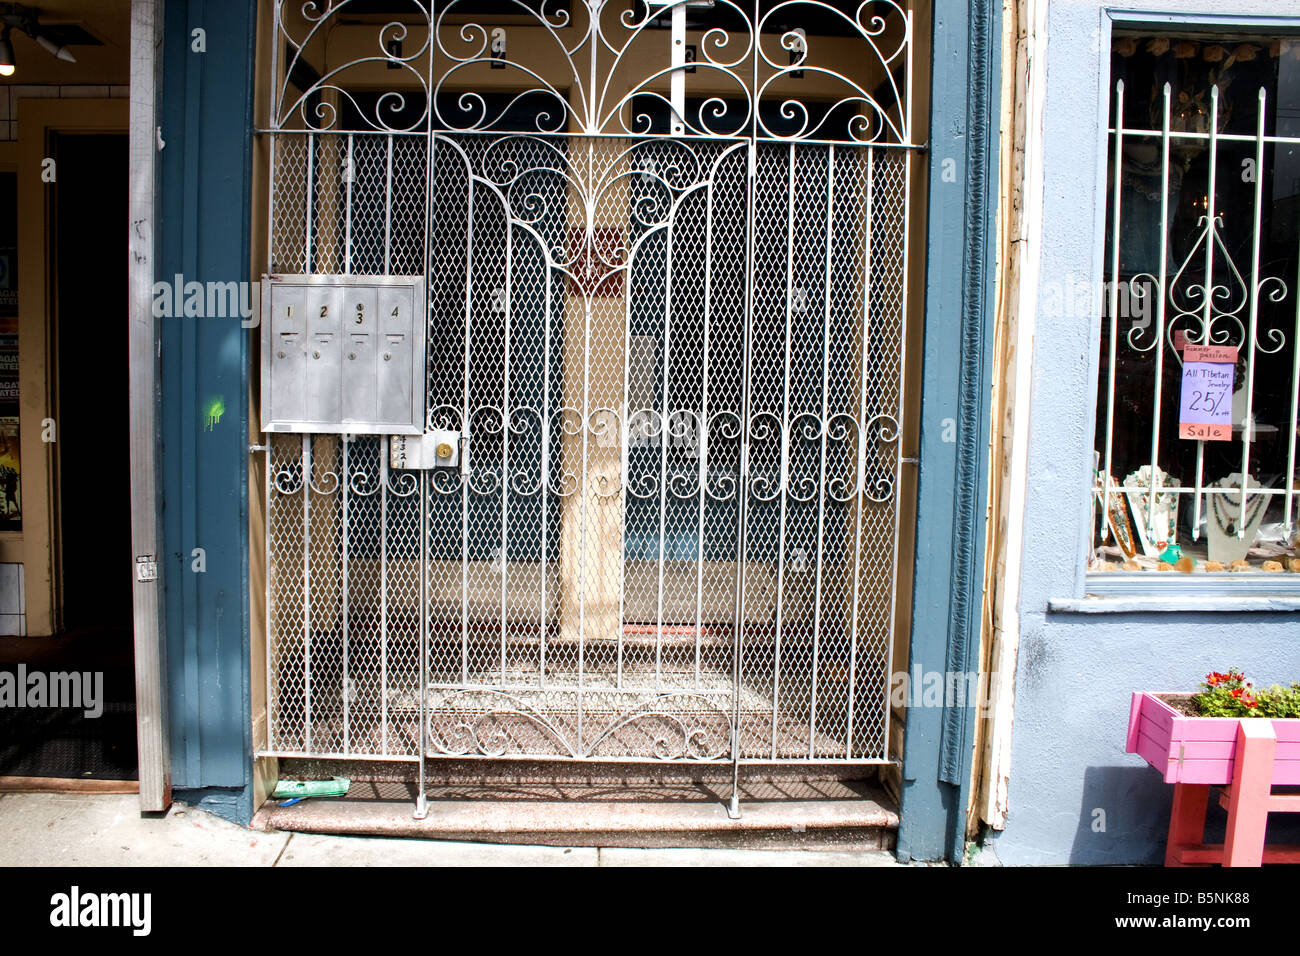 Metal grate door in front of a building next to a store in San Francisco, California Stock Photo